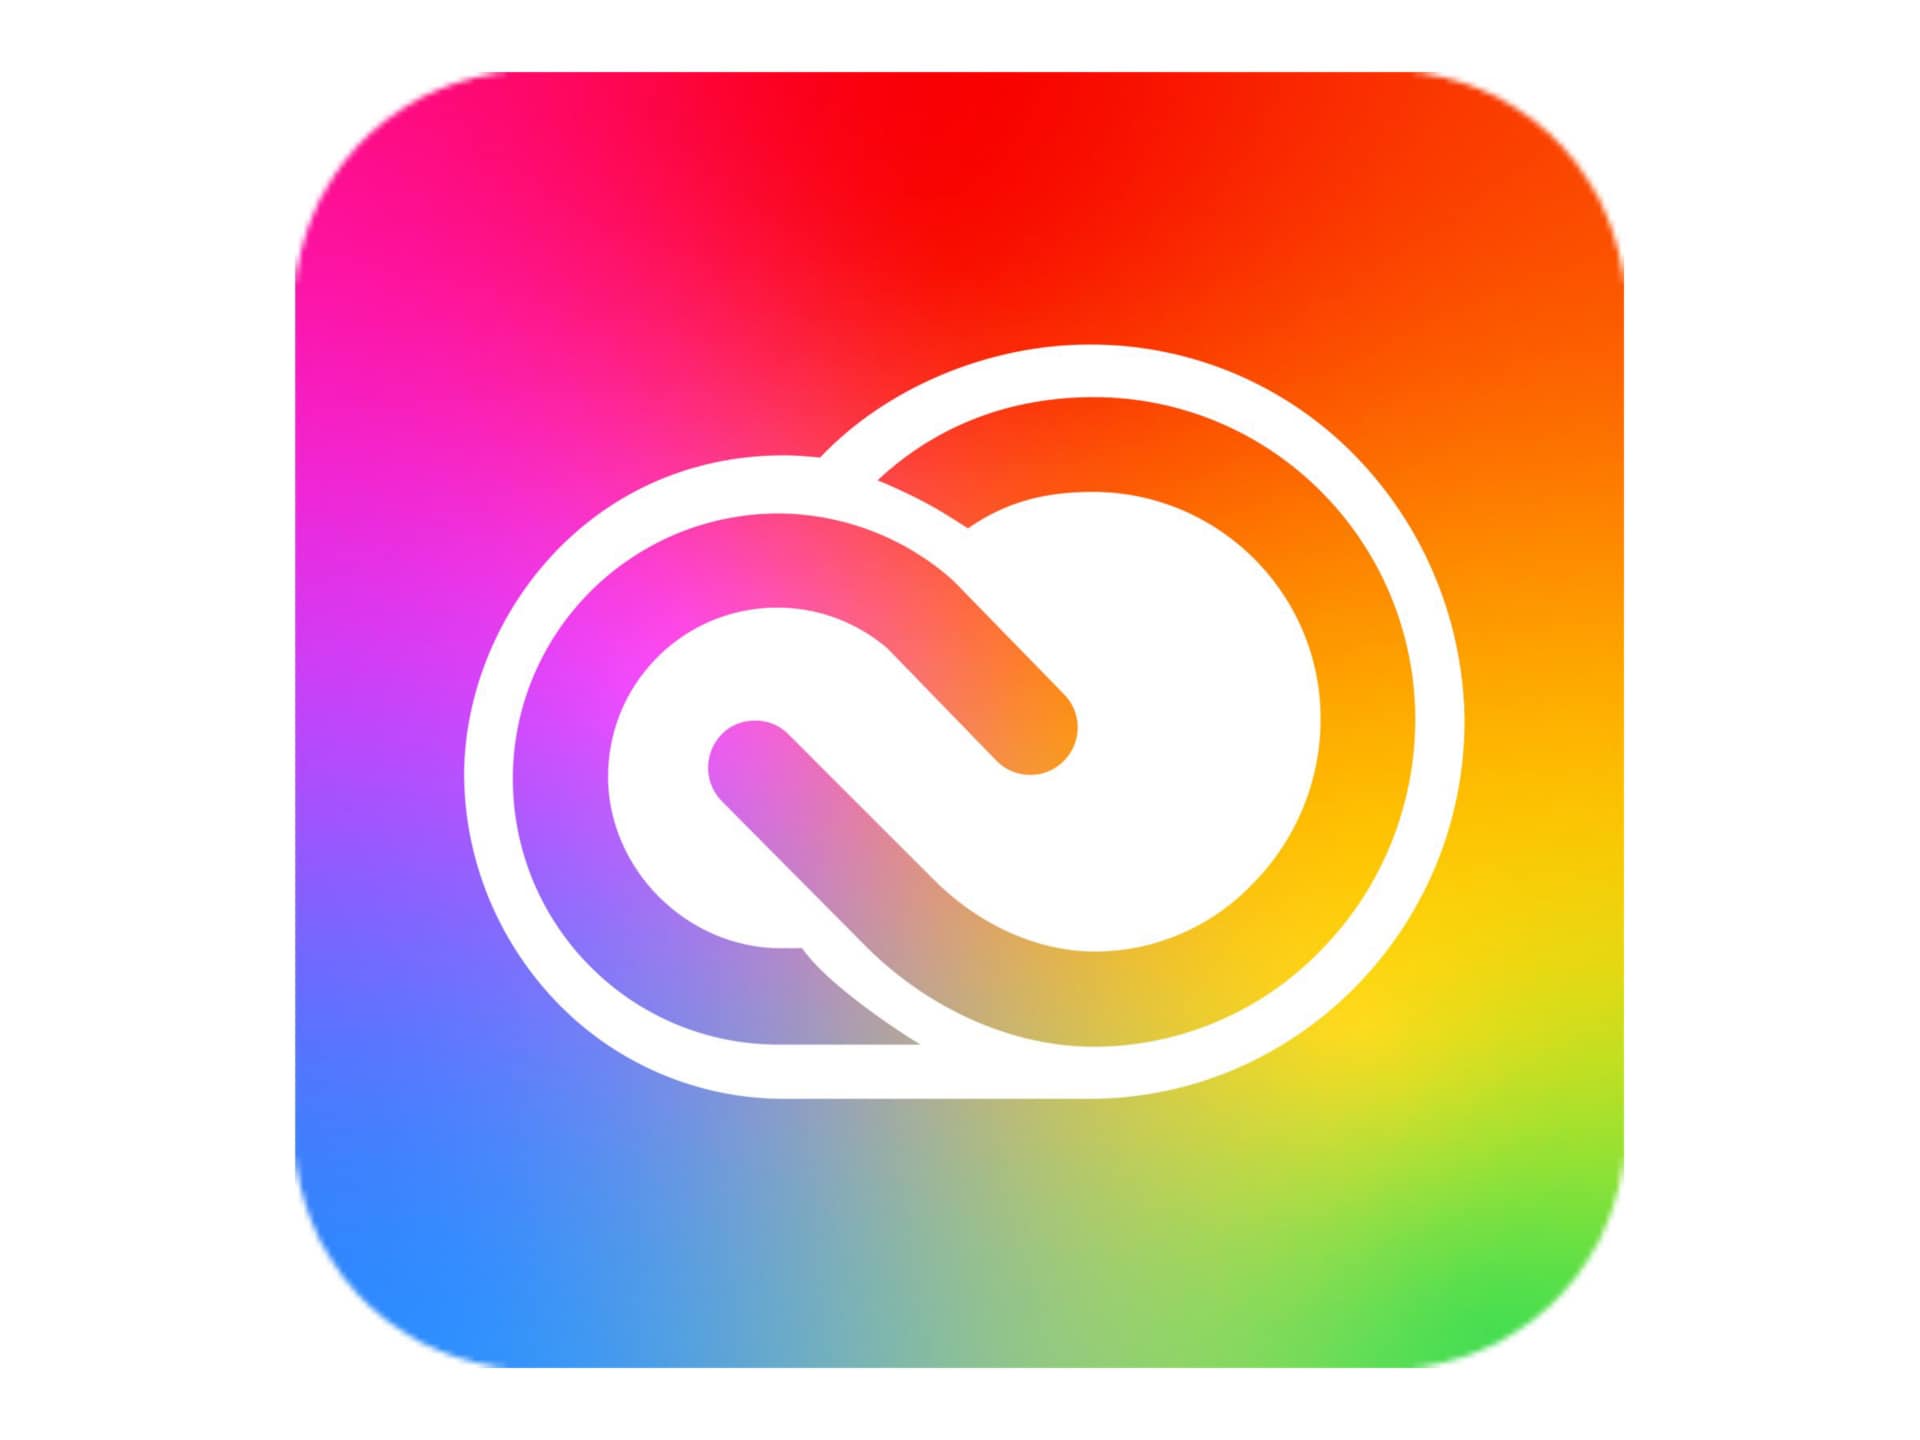 Adobe Creative Cloud for teams - All Apps - Subscription New - 1 user, 10 assets per month - with Adobe Stock